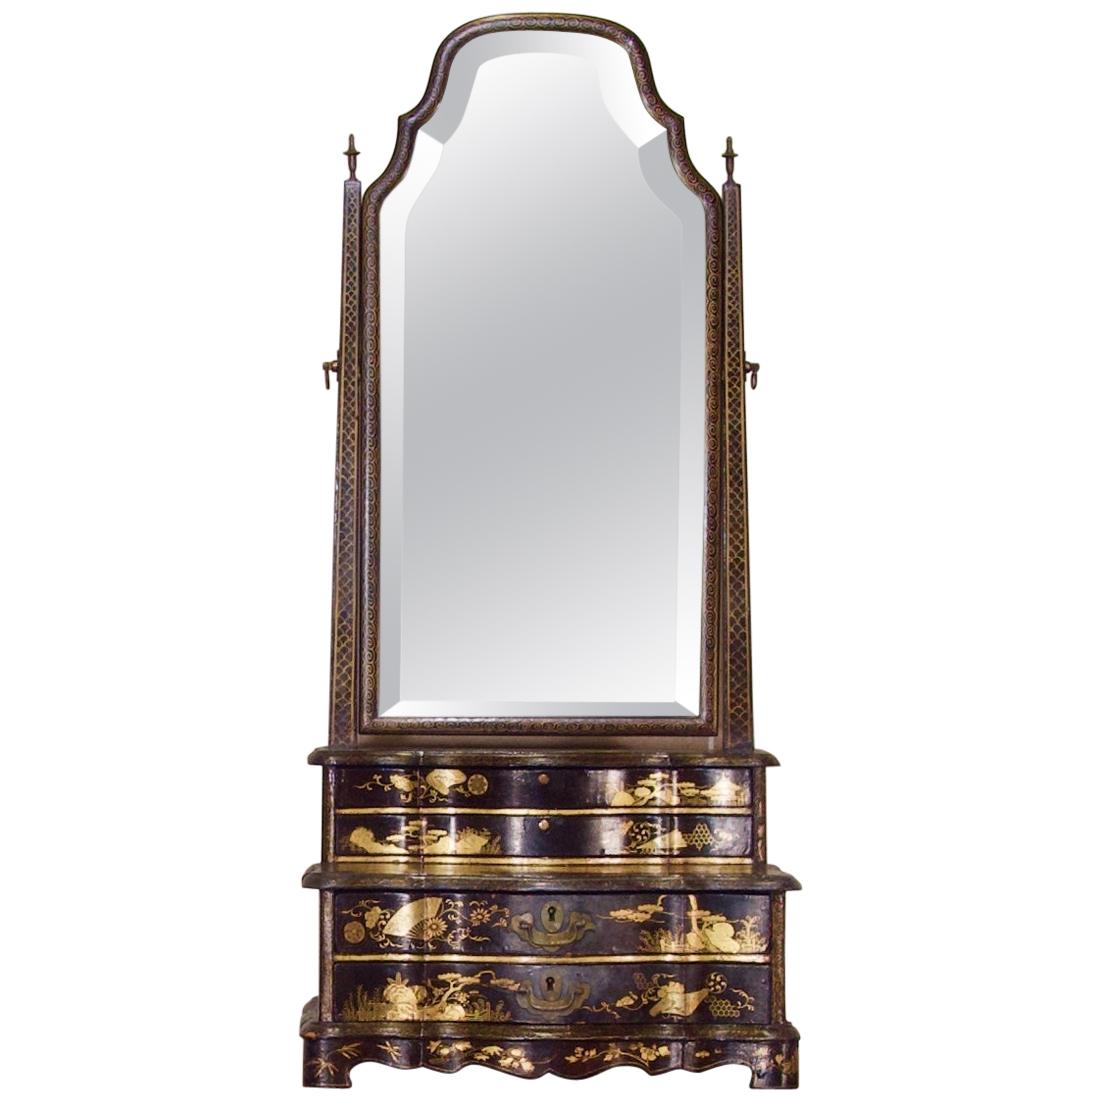 An Early 19th Century Chinese Export Chinoiserie Dressing Table Mirror